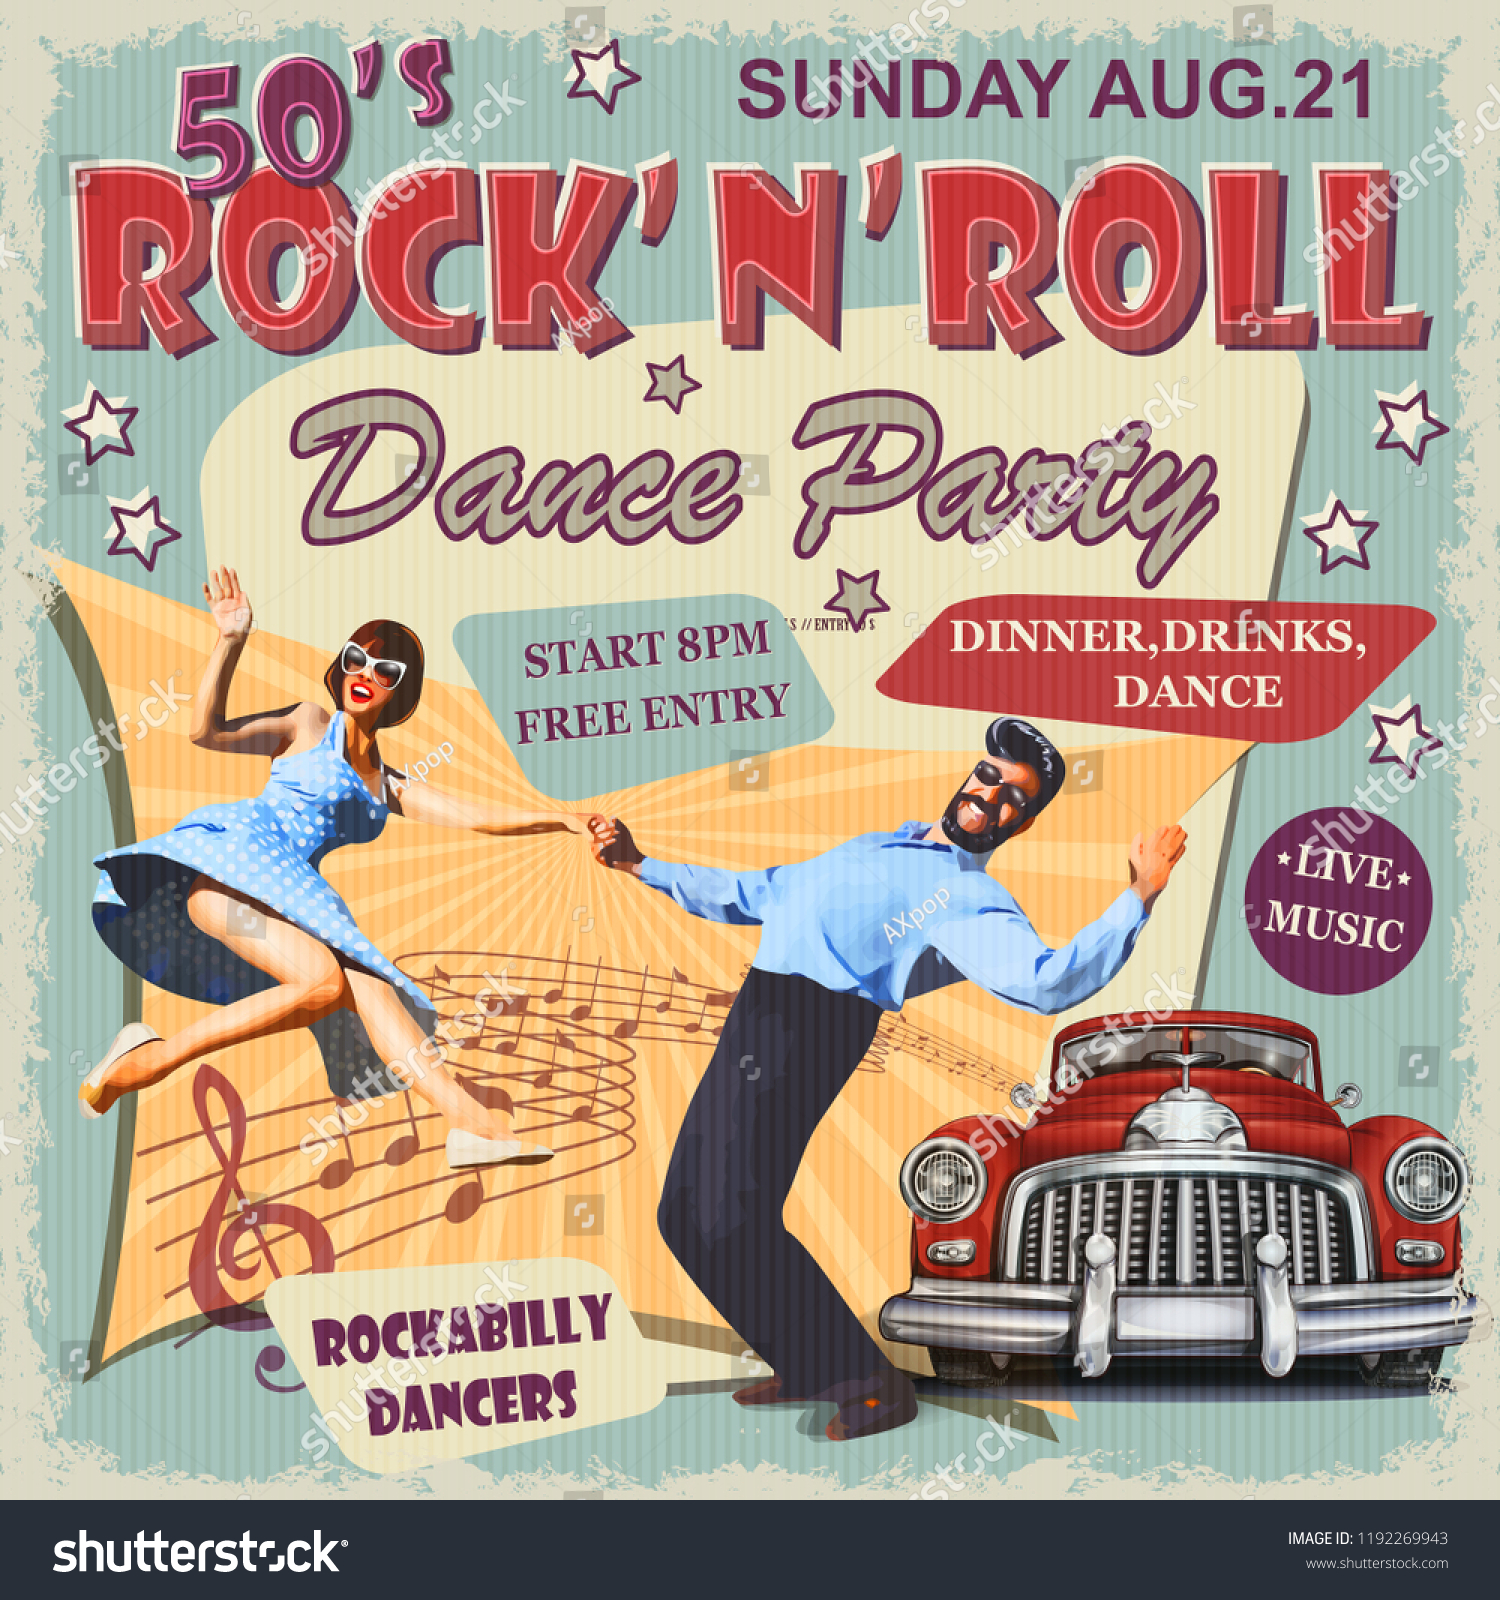 SVG of Rock and Roll Dance Party retro poster.  svg